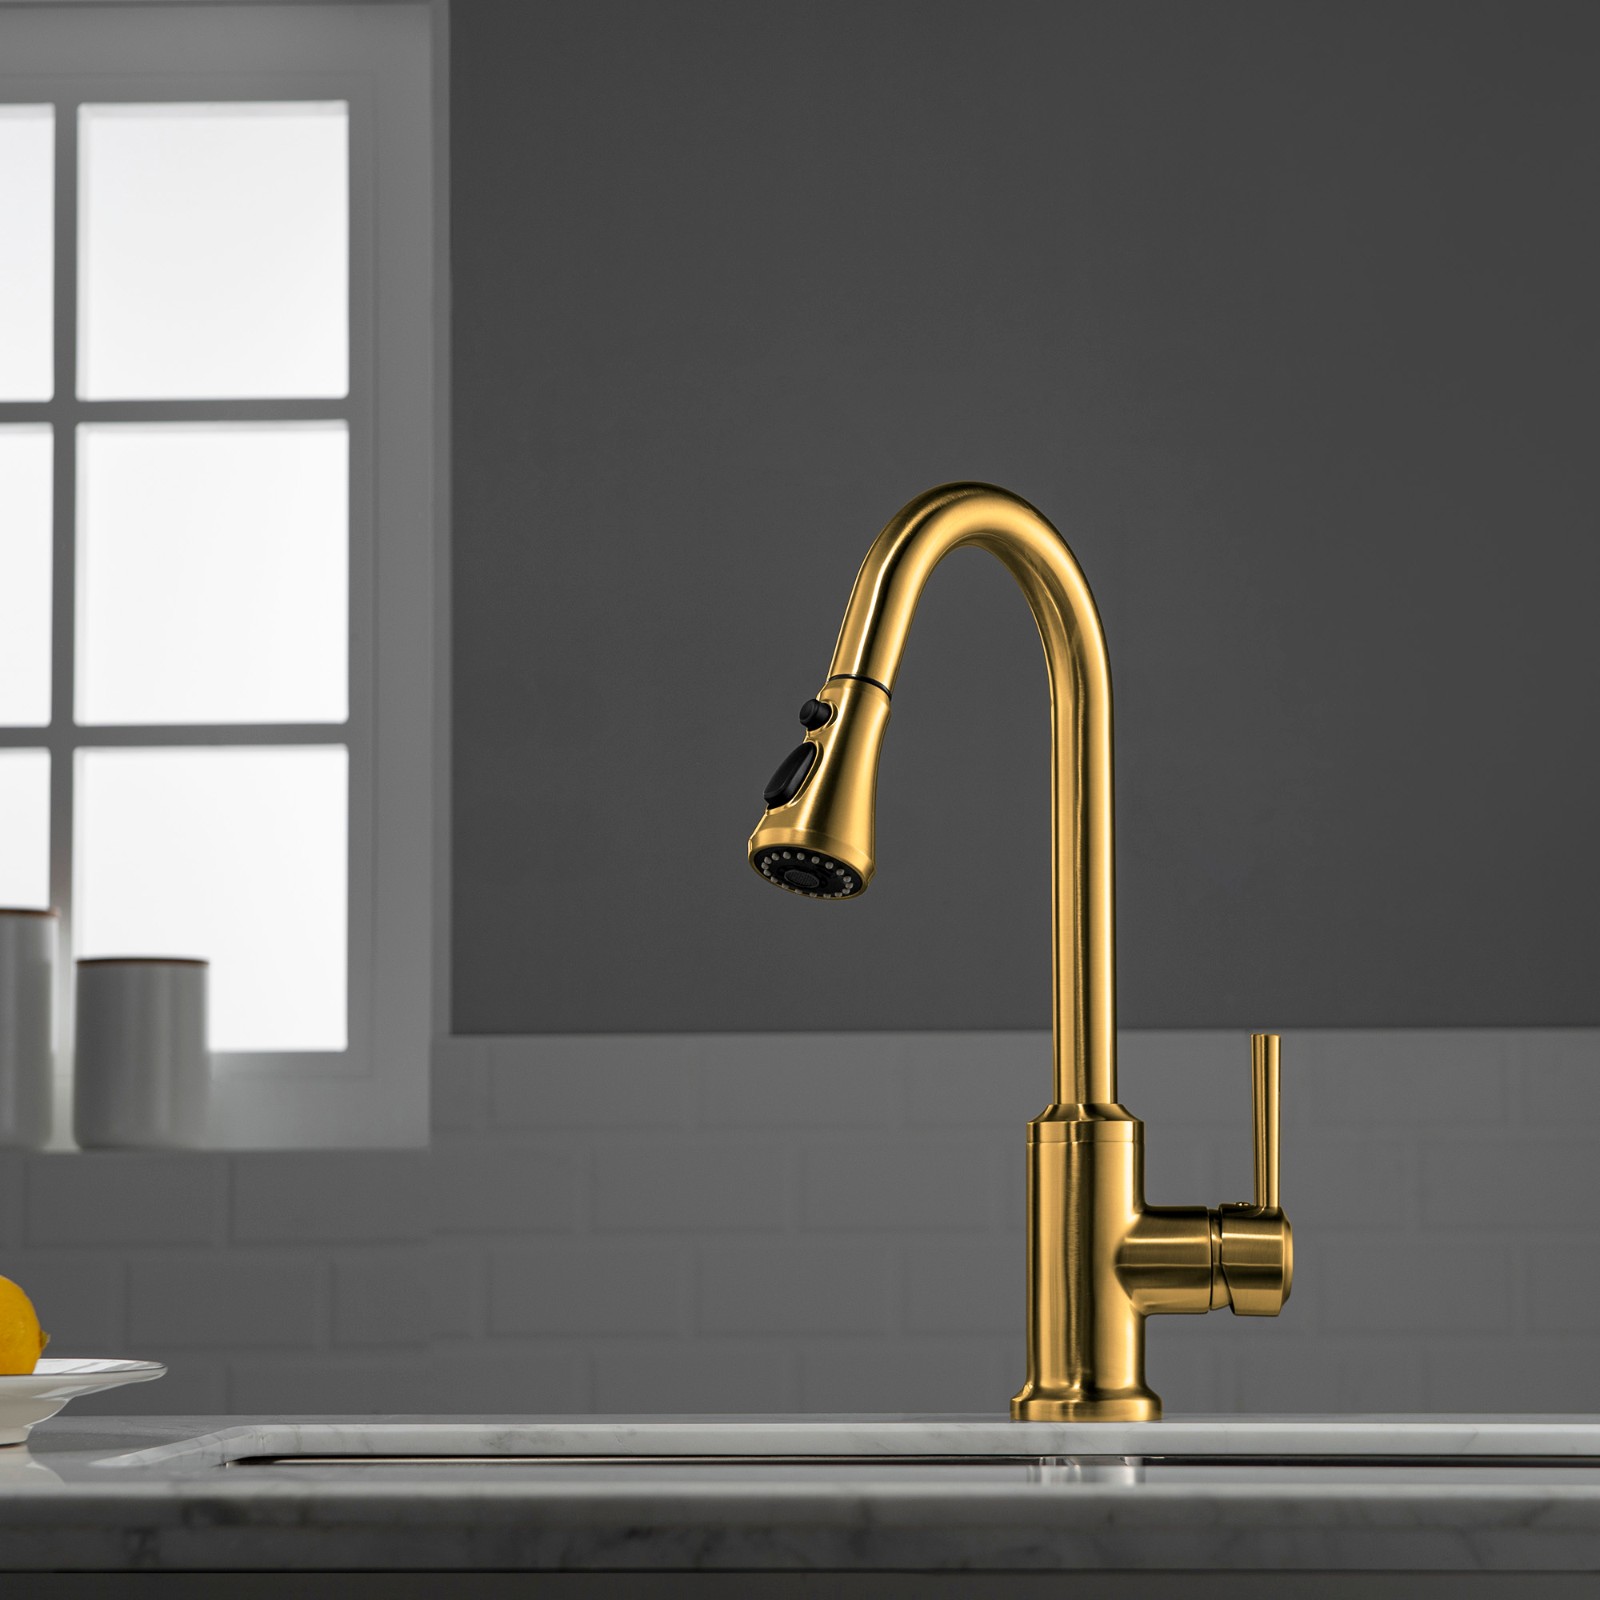  WOODBRIDGE WK101201BG Stainless Steel Single Handle Pull Down Kitchen Faucet in Brushed Gold Finish._4996